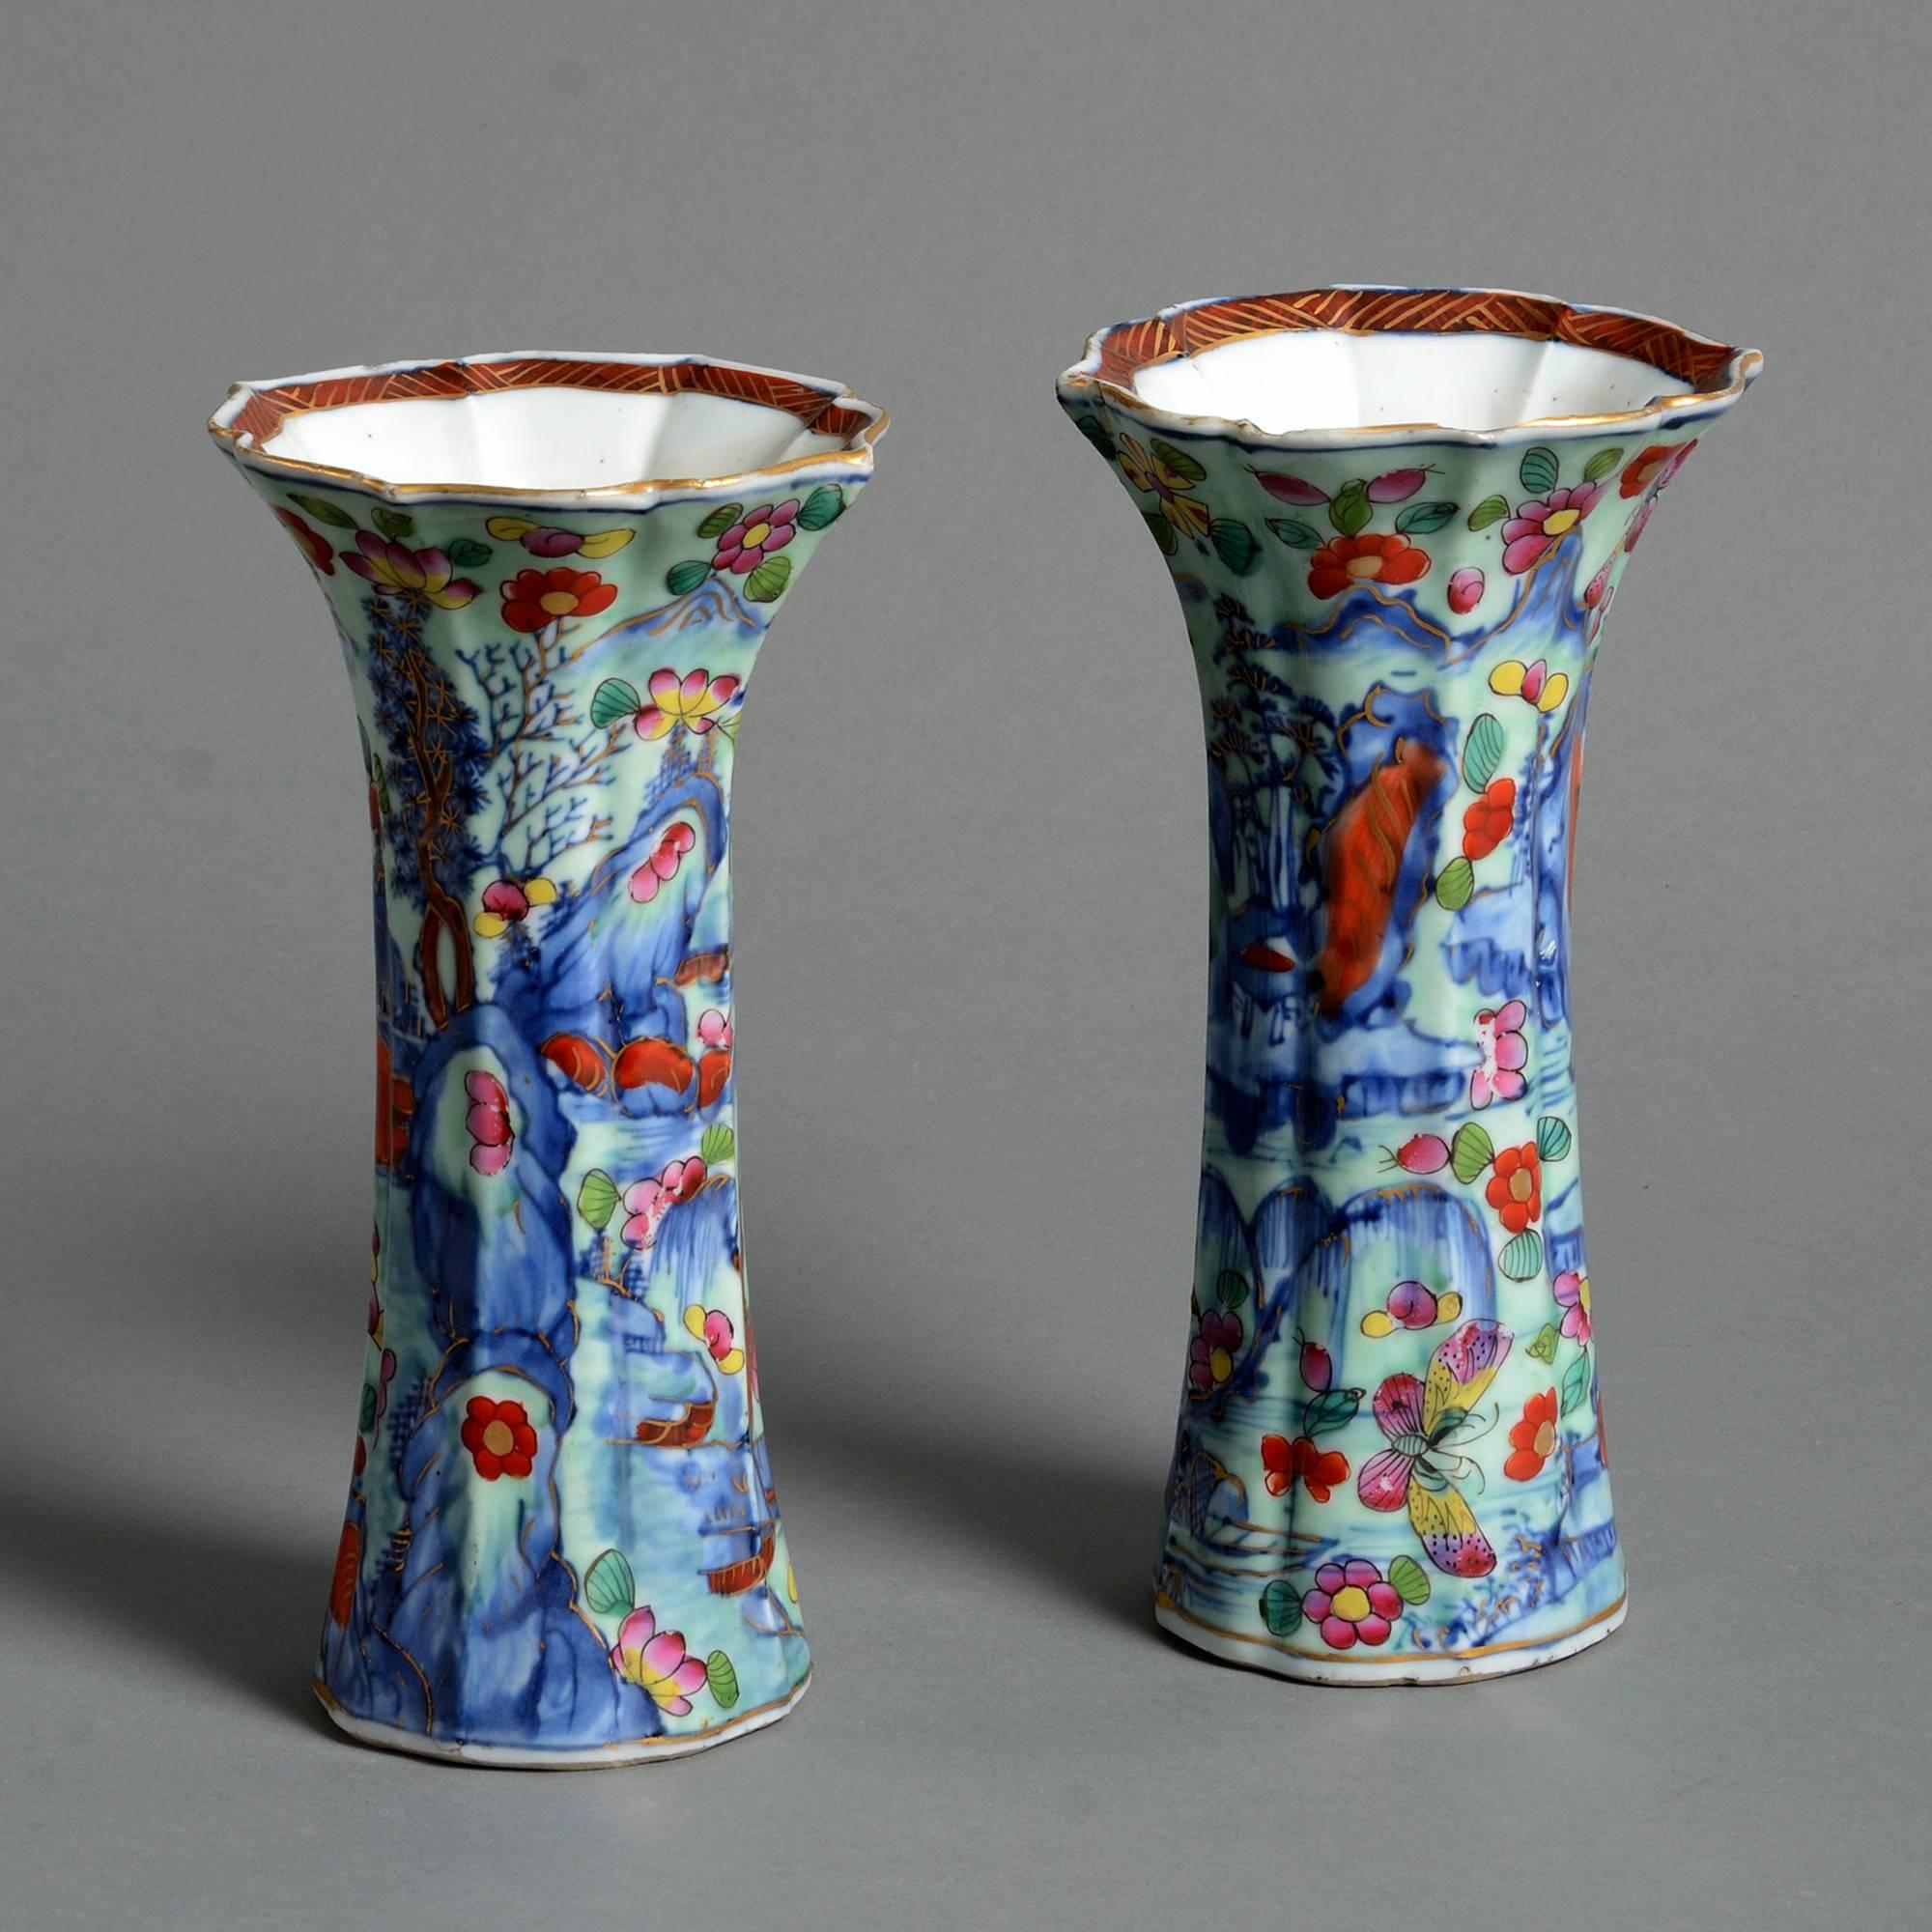 A fine pair of late 18th century porcelain trumpet vases with clobbered decoration throughout. 

Qing dynasty, Qianlong period.